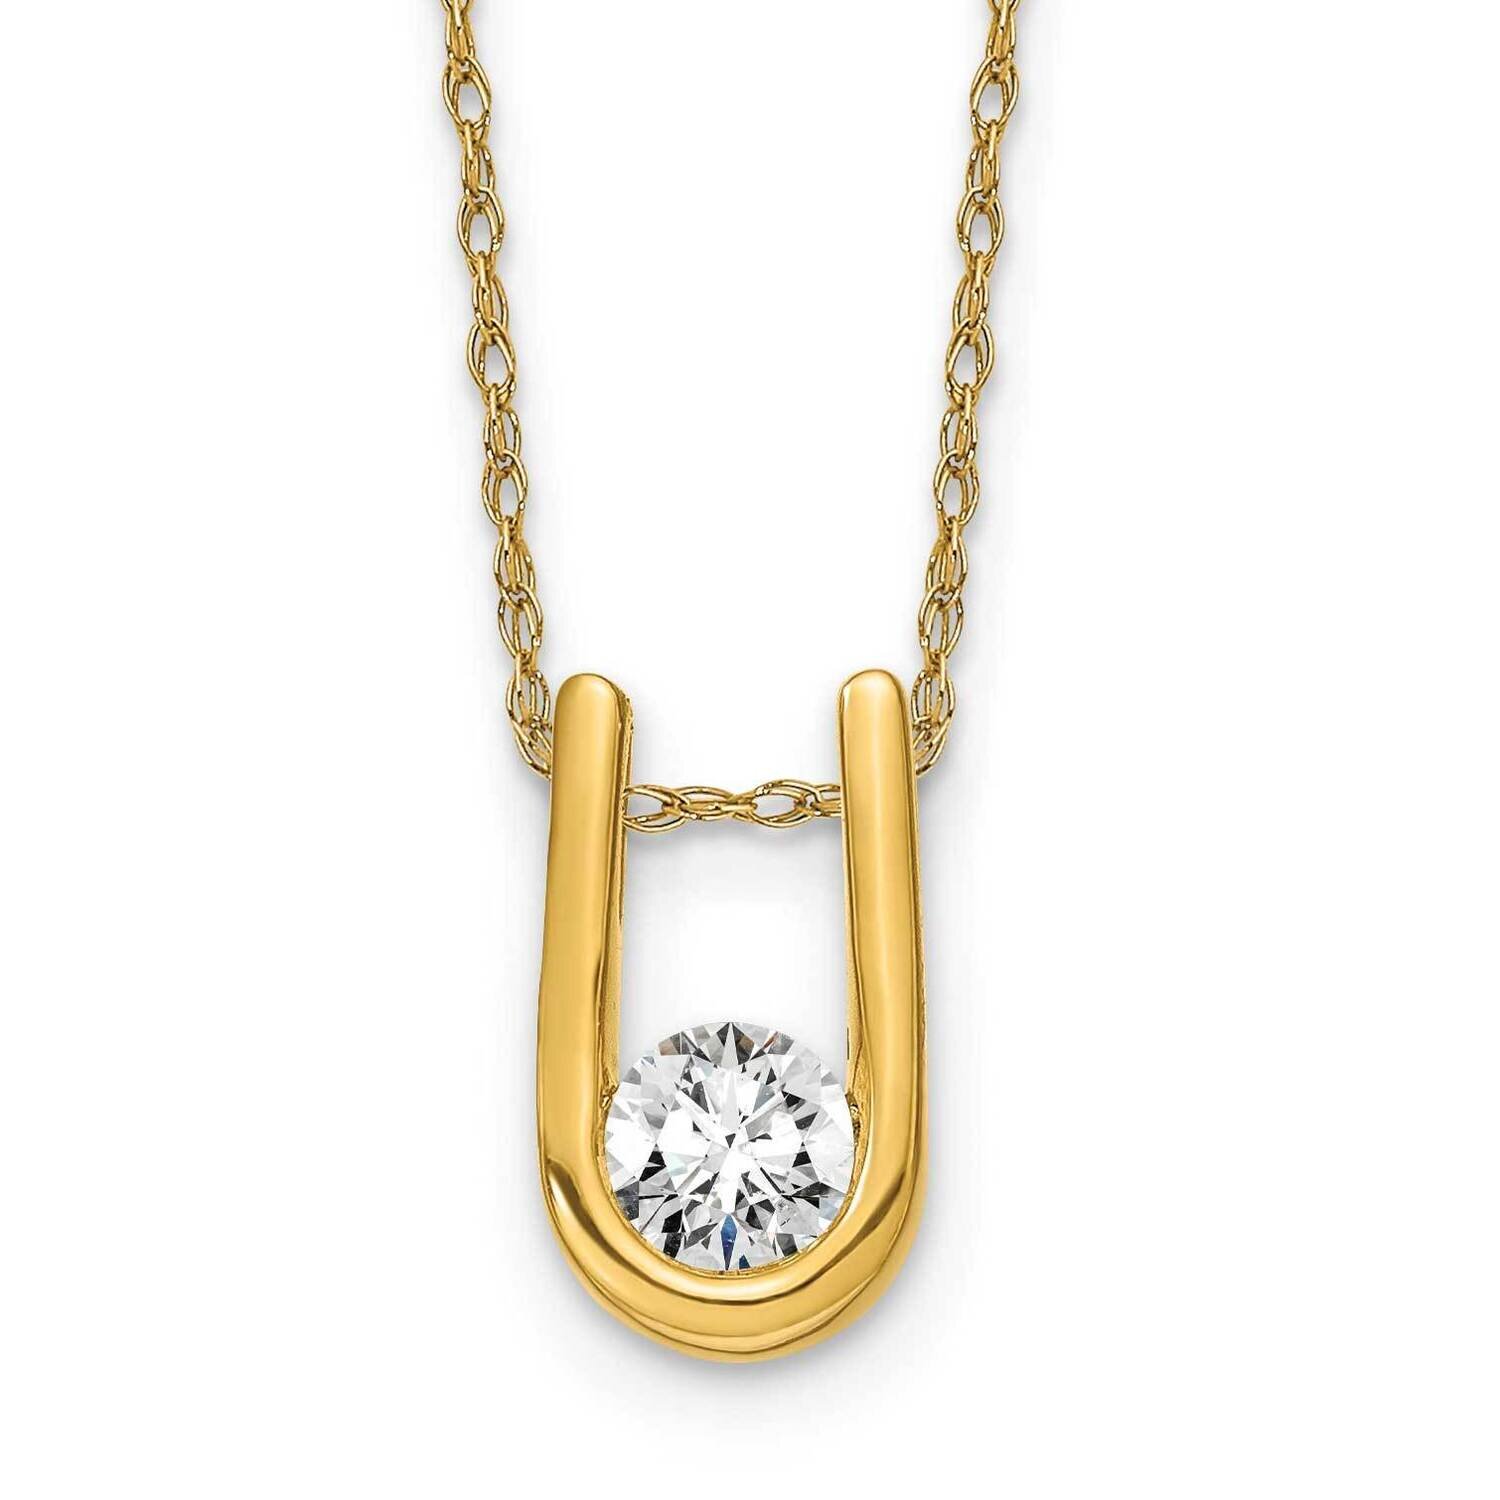 Pendant with Chain 1 Rd .33Ct Dia: Lg 18 Inch 14k Gold Lab Grown Diamond PM5919-033-YLG-18